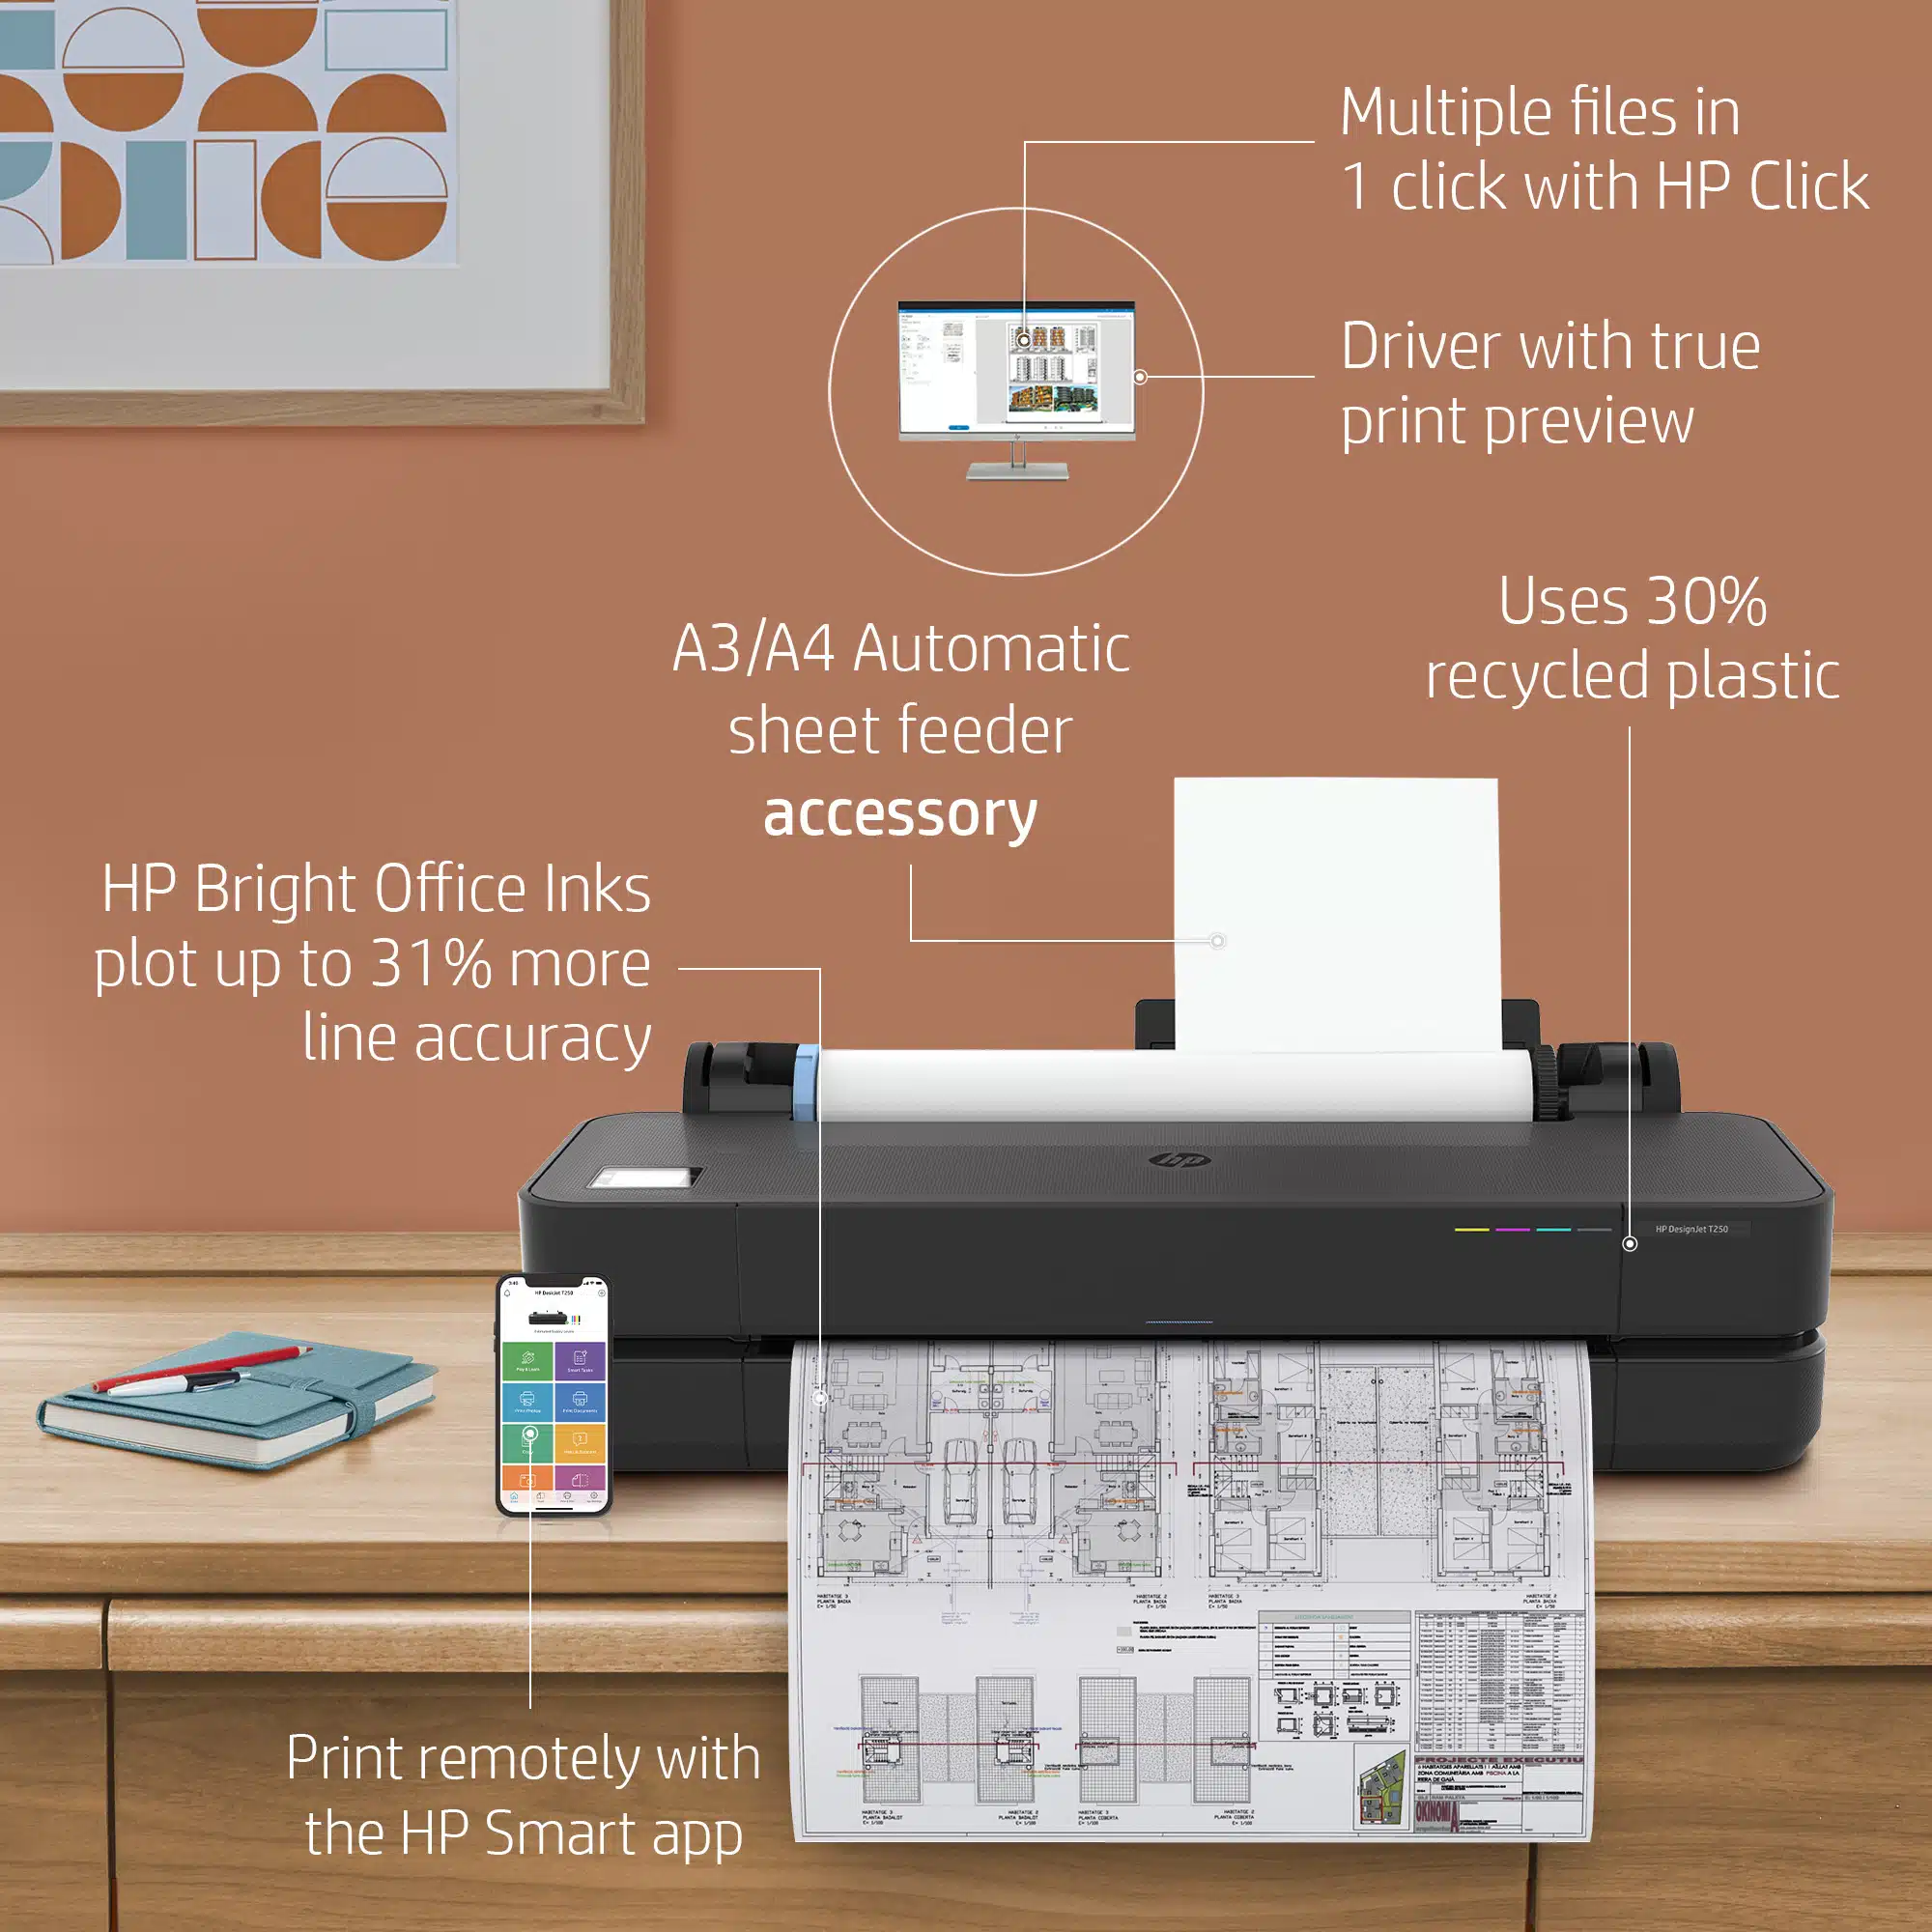 HP Designjet T230 buying facts - A3 auto feed sheet feeder accessory